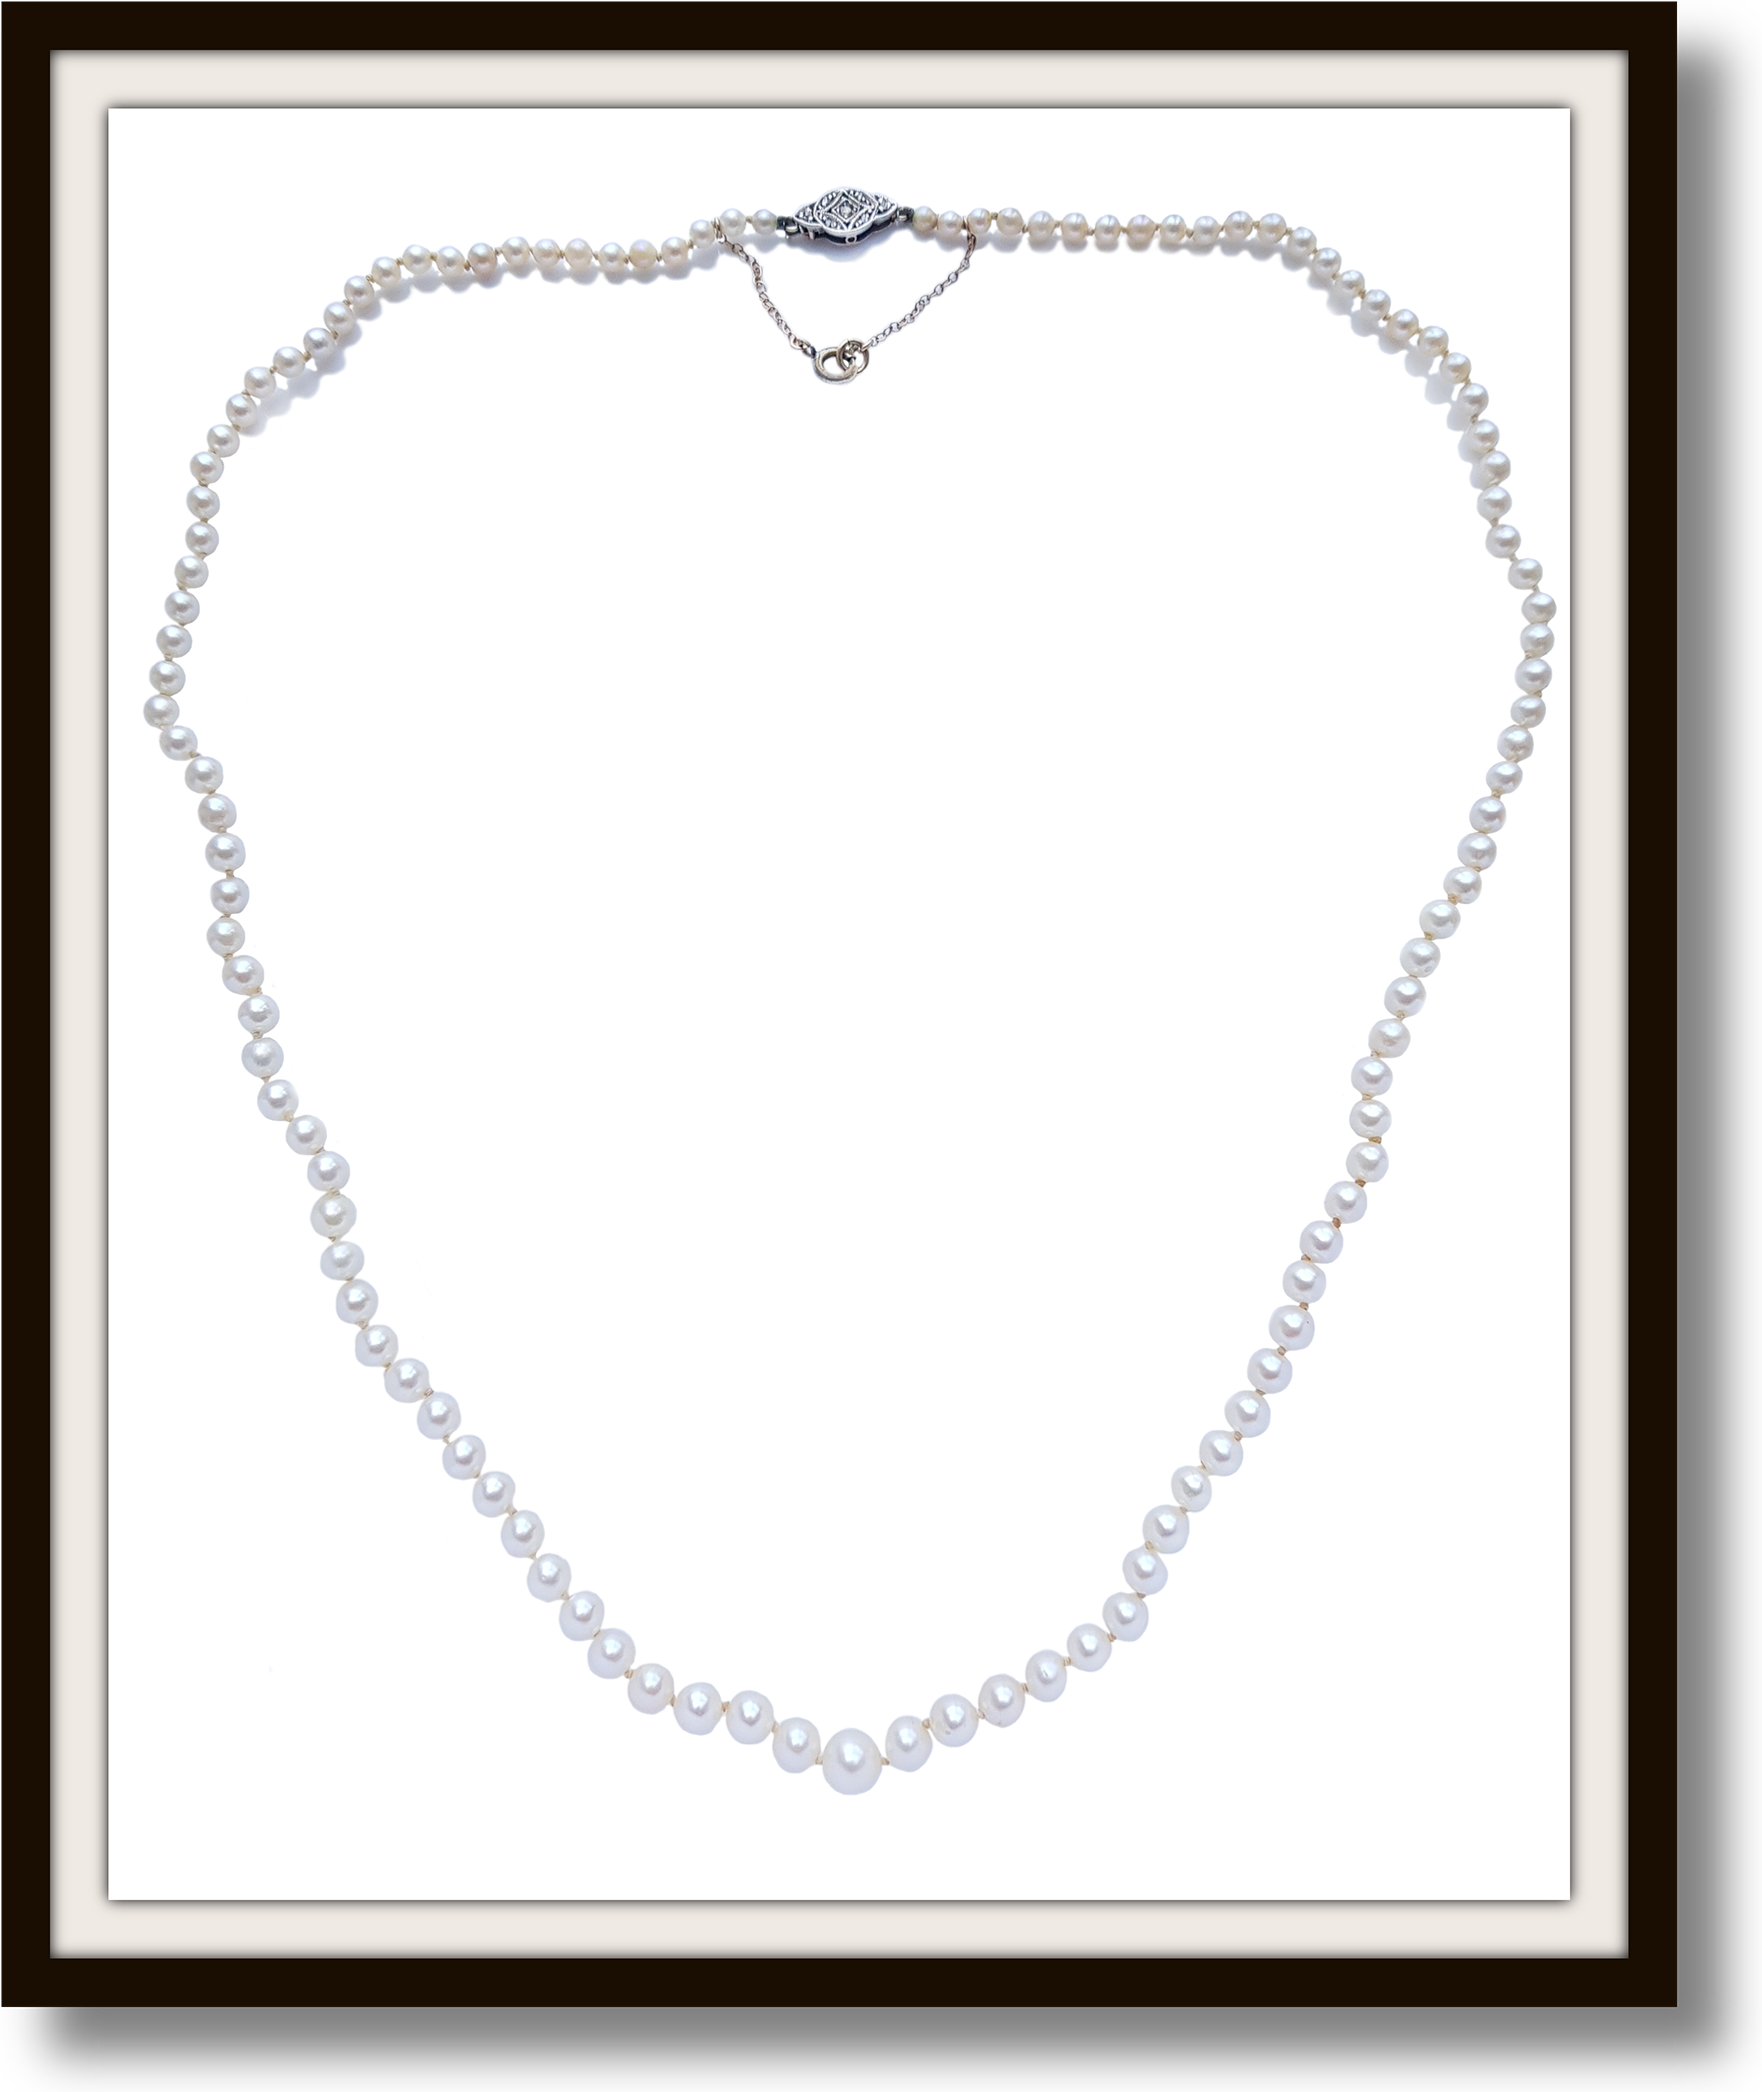 Vintage 22in Cultured Graduated Knotted Pearl Necklace 6.54mm-3.7mm rose cut diamond clasp